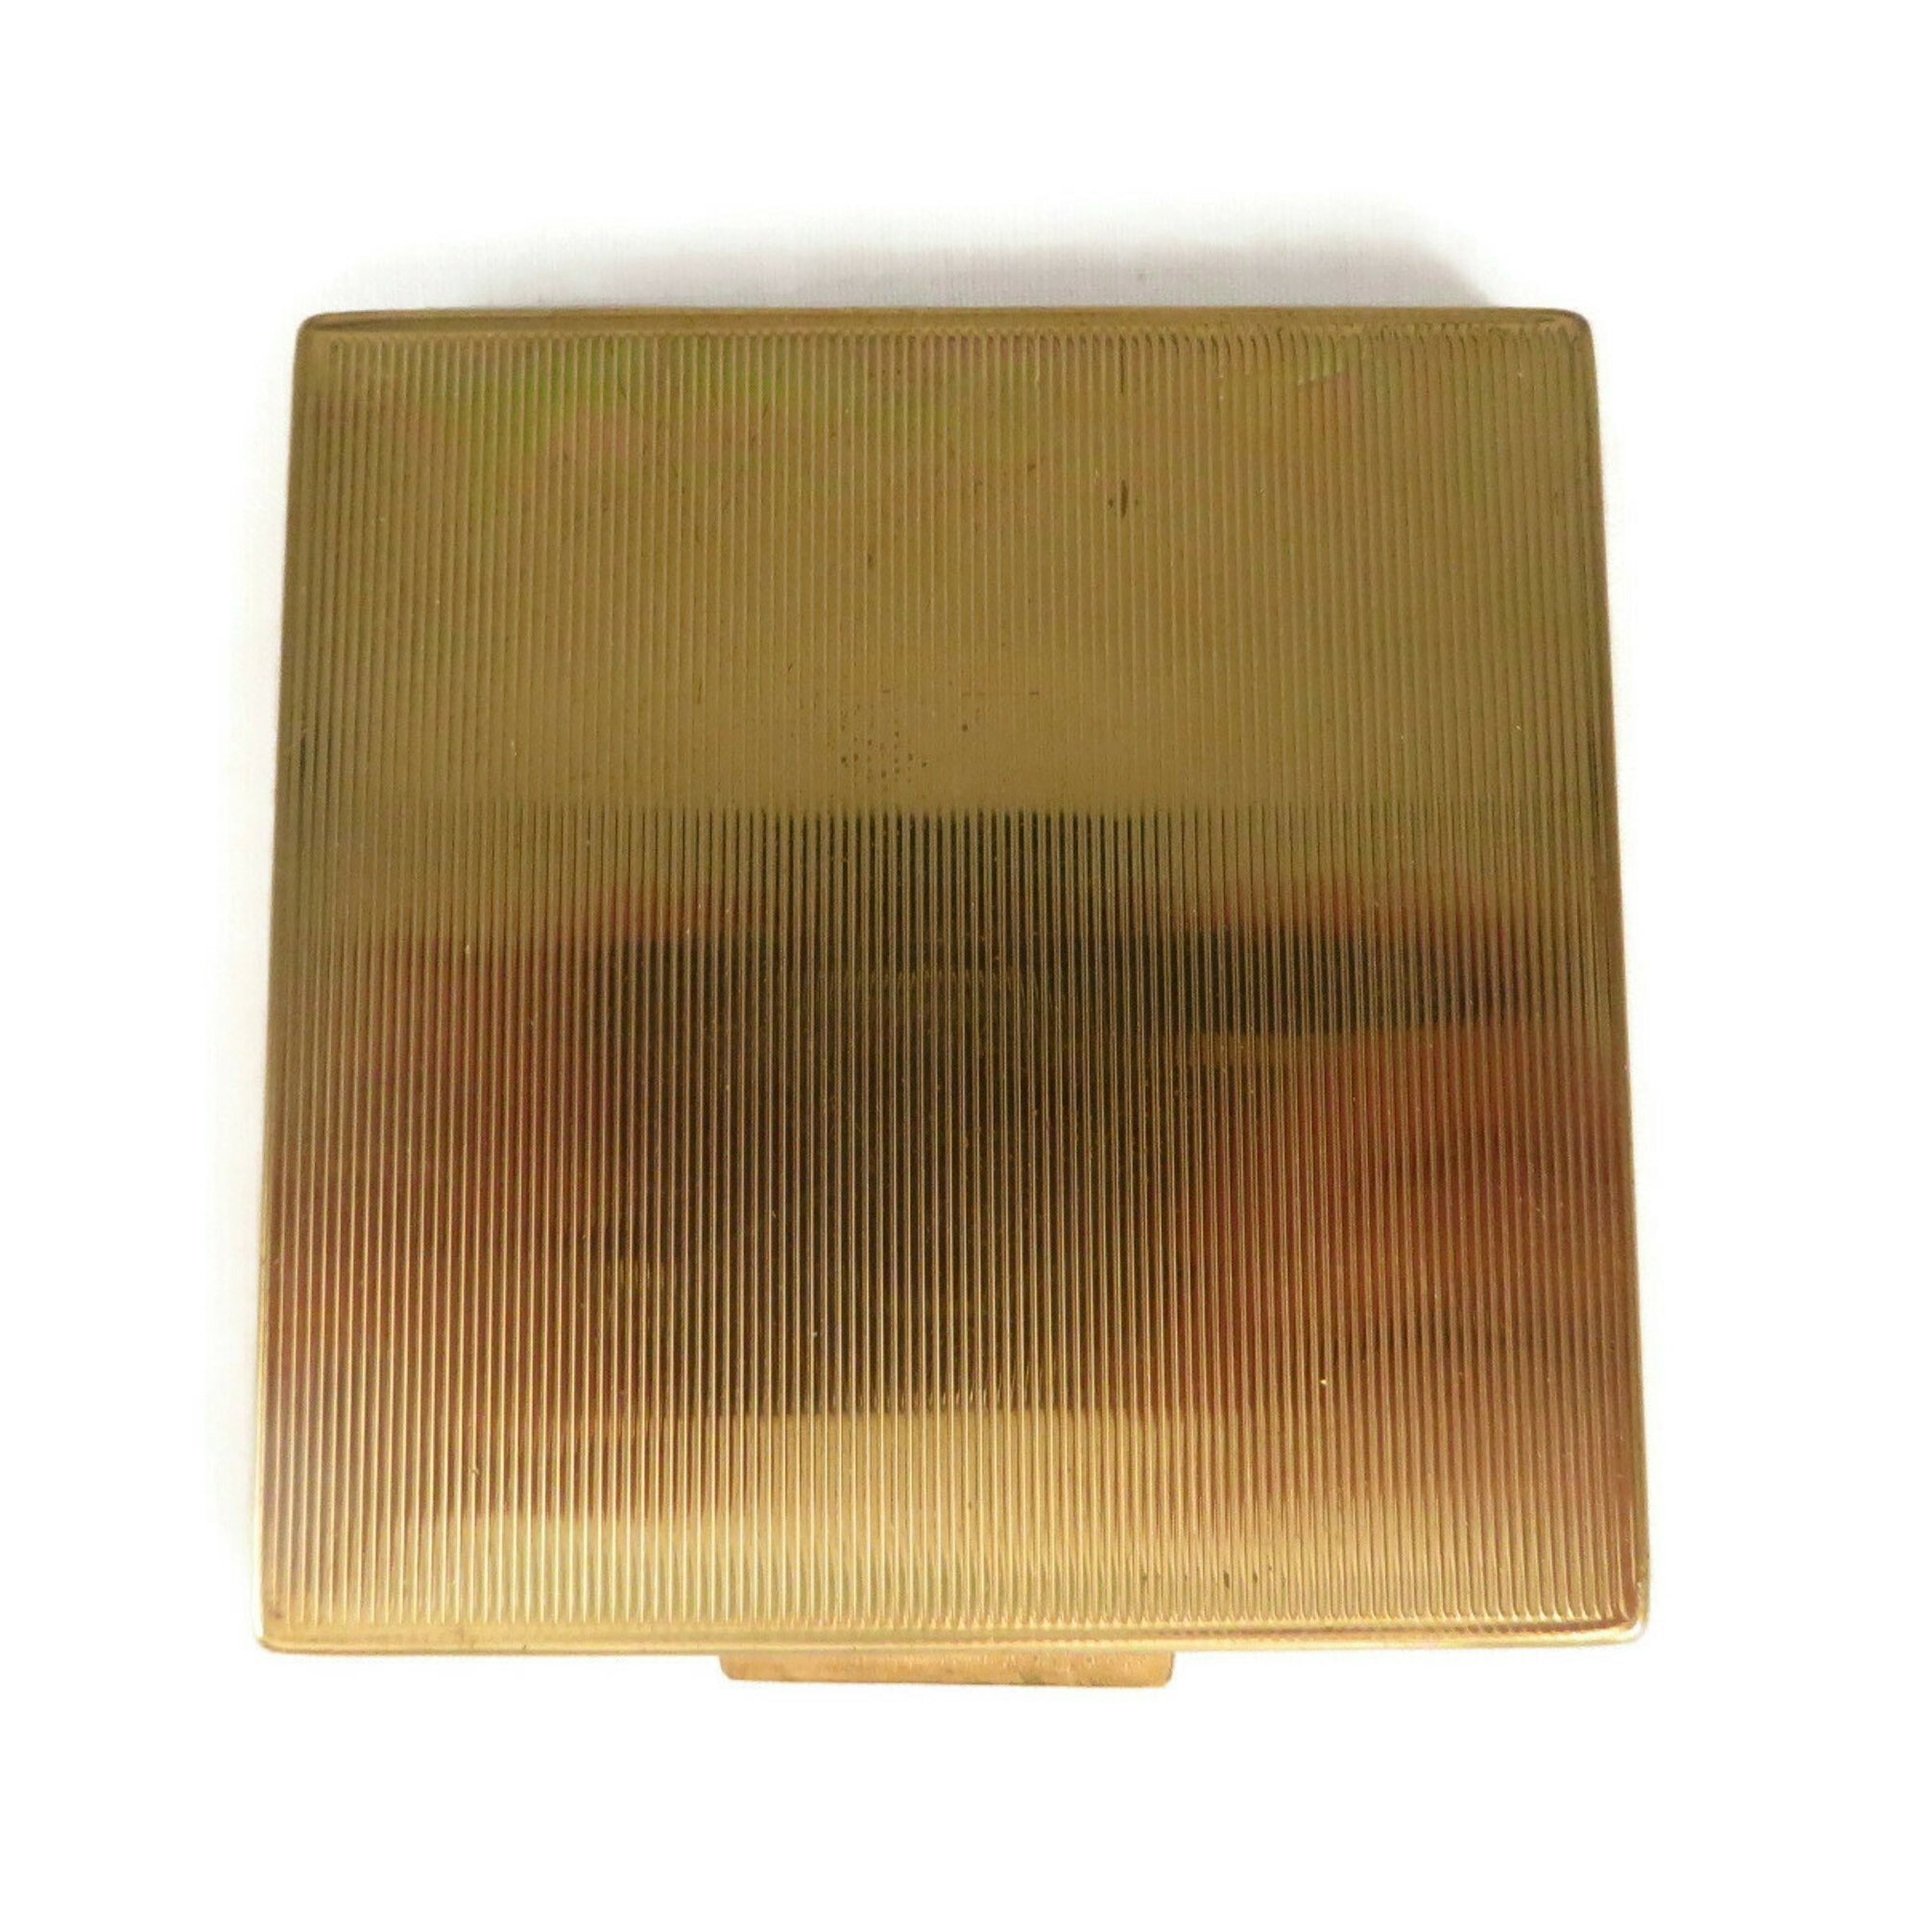 Rex Mother of Pearl Gold Tone Compact